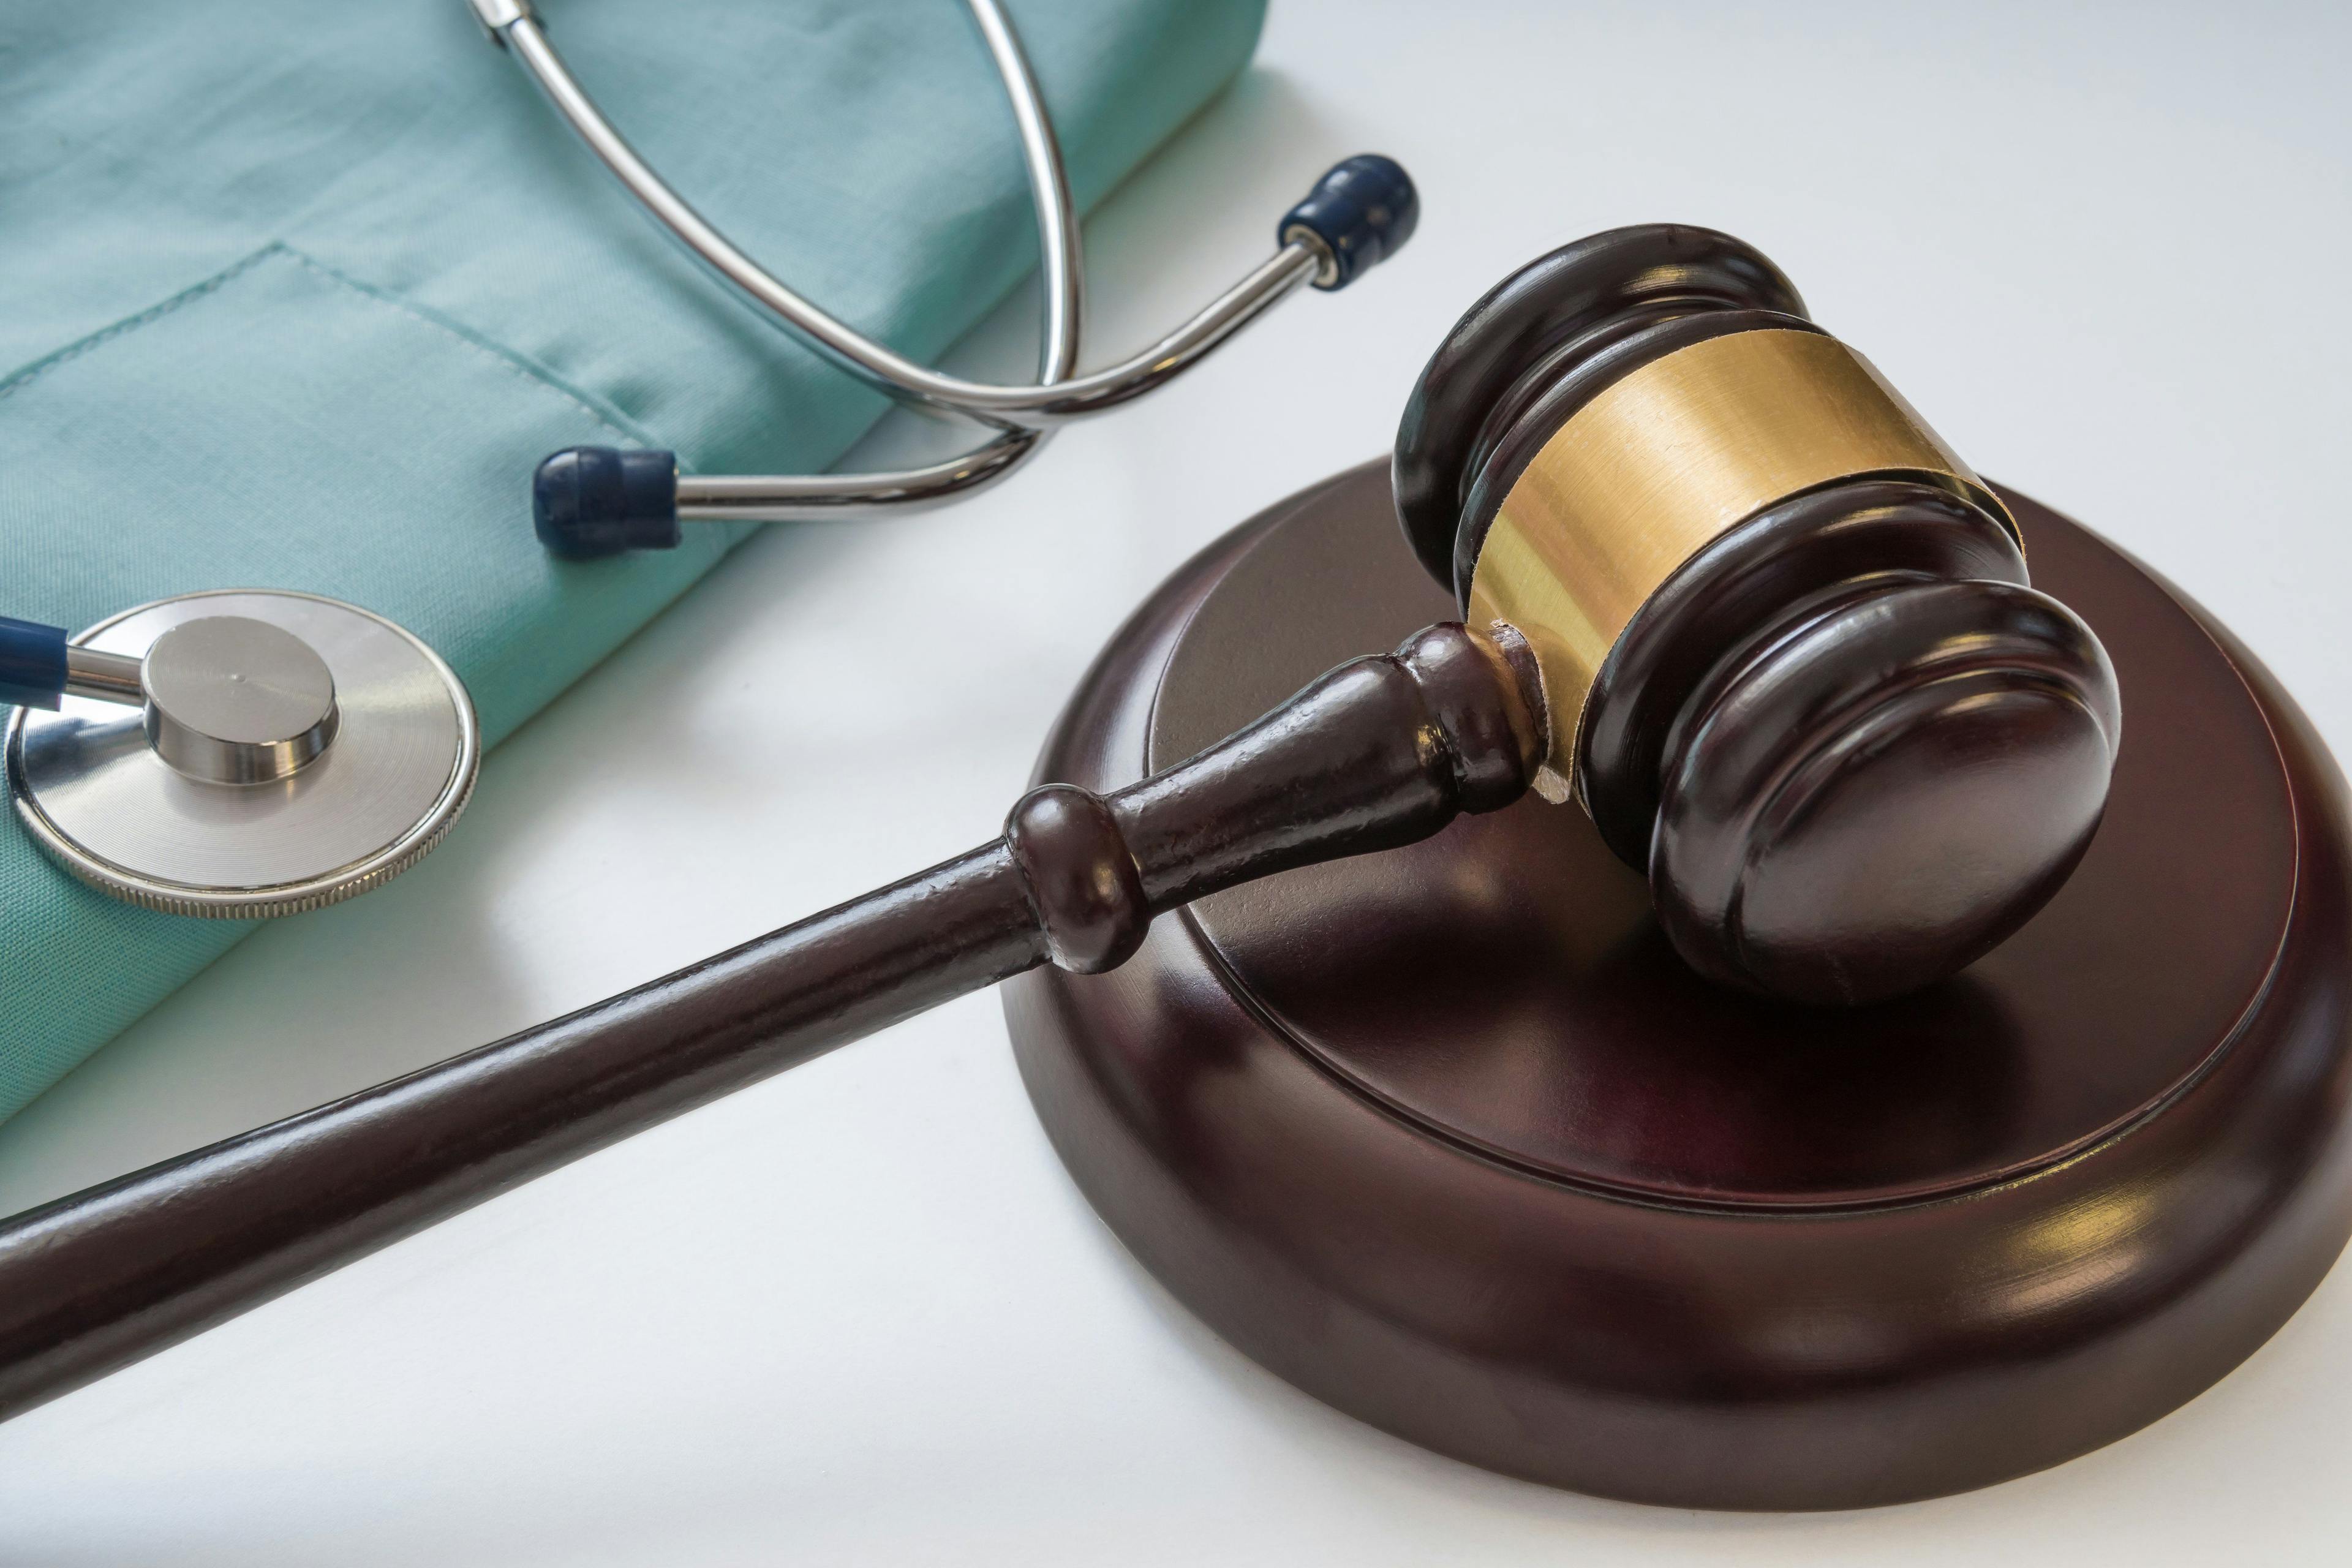 Healthcare giant pays $46 million to settle Stark Law case